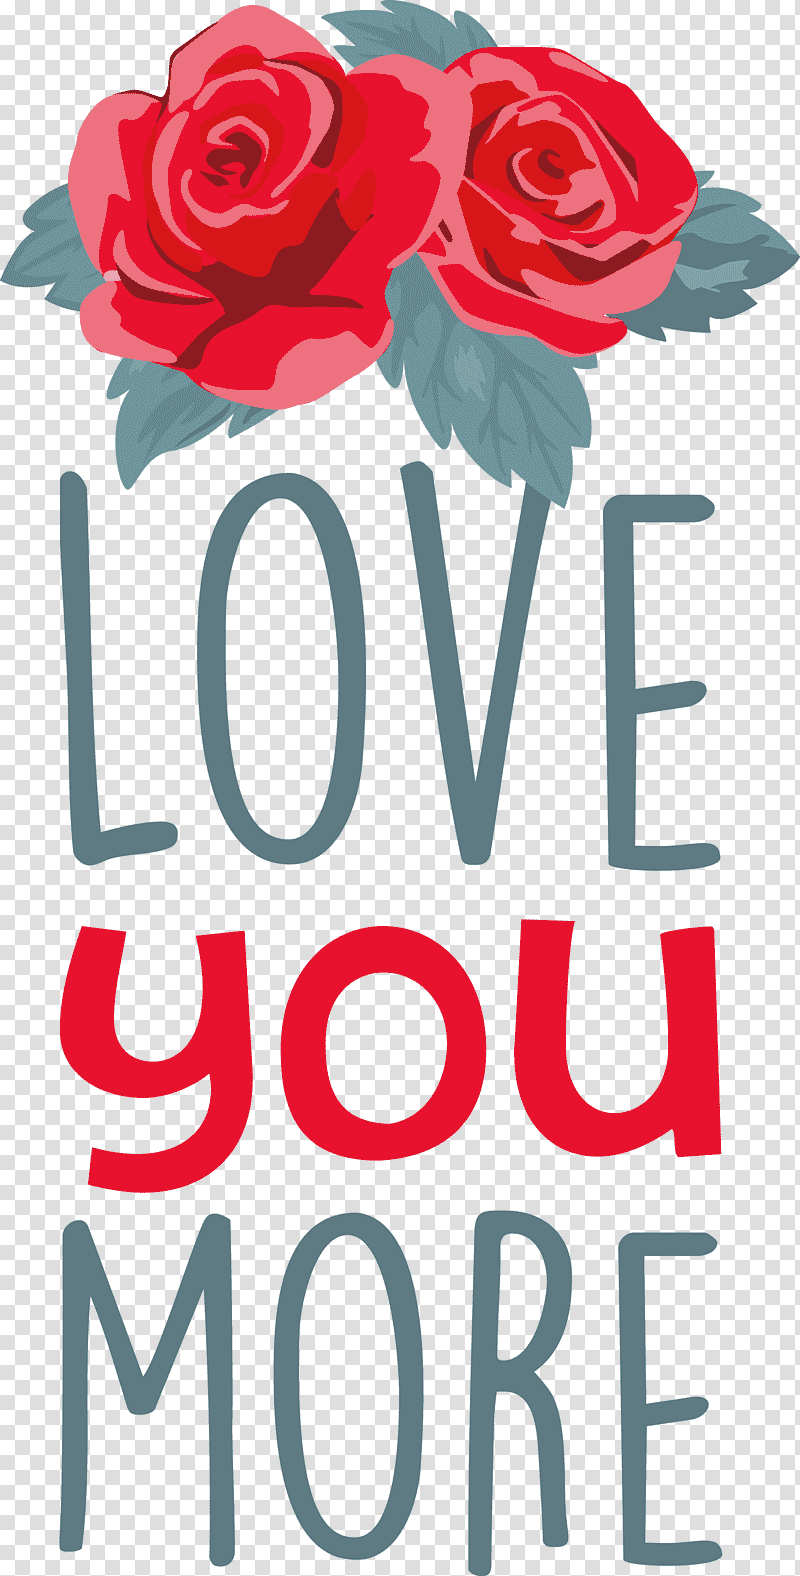 Love You More Valentines Day Valentine, Quote, Rose, Blue Rose, Flower, Cut Flowers, Garden Roses transparent background PNG clipart